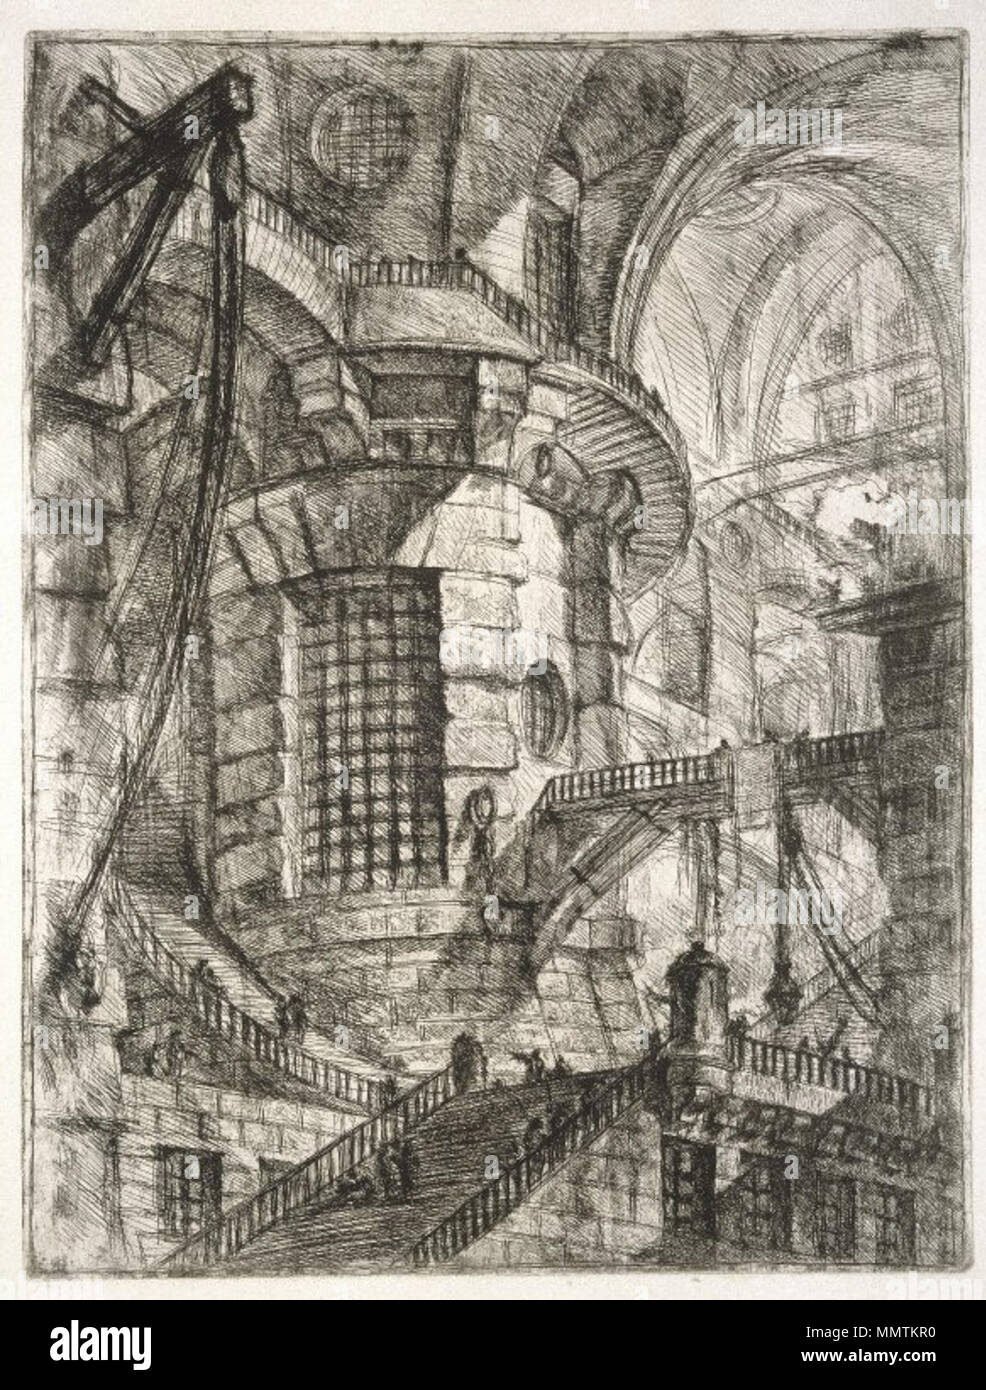 The Round Tower, plate III from Le Carceri d'Invenzione. between 1747 and 1751. Brooklyn Museum - The Round Tower plate III from Invenzioni Capric di Carceri - Giovanni Battista Piranesi Stock Photo